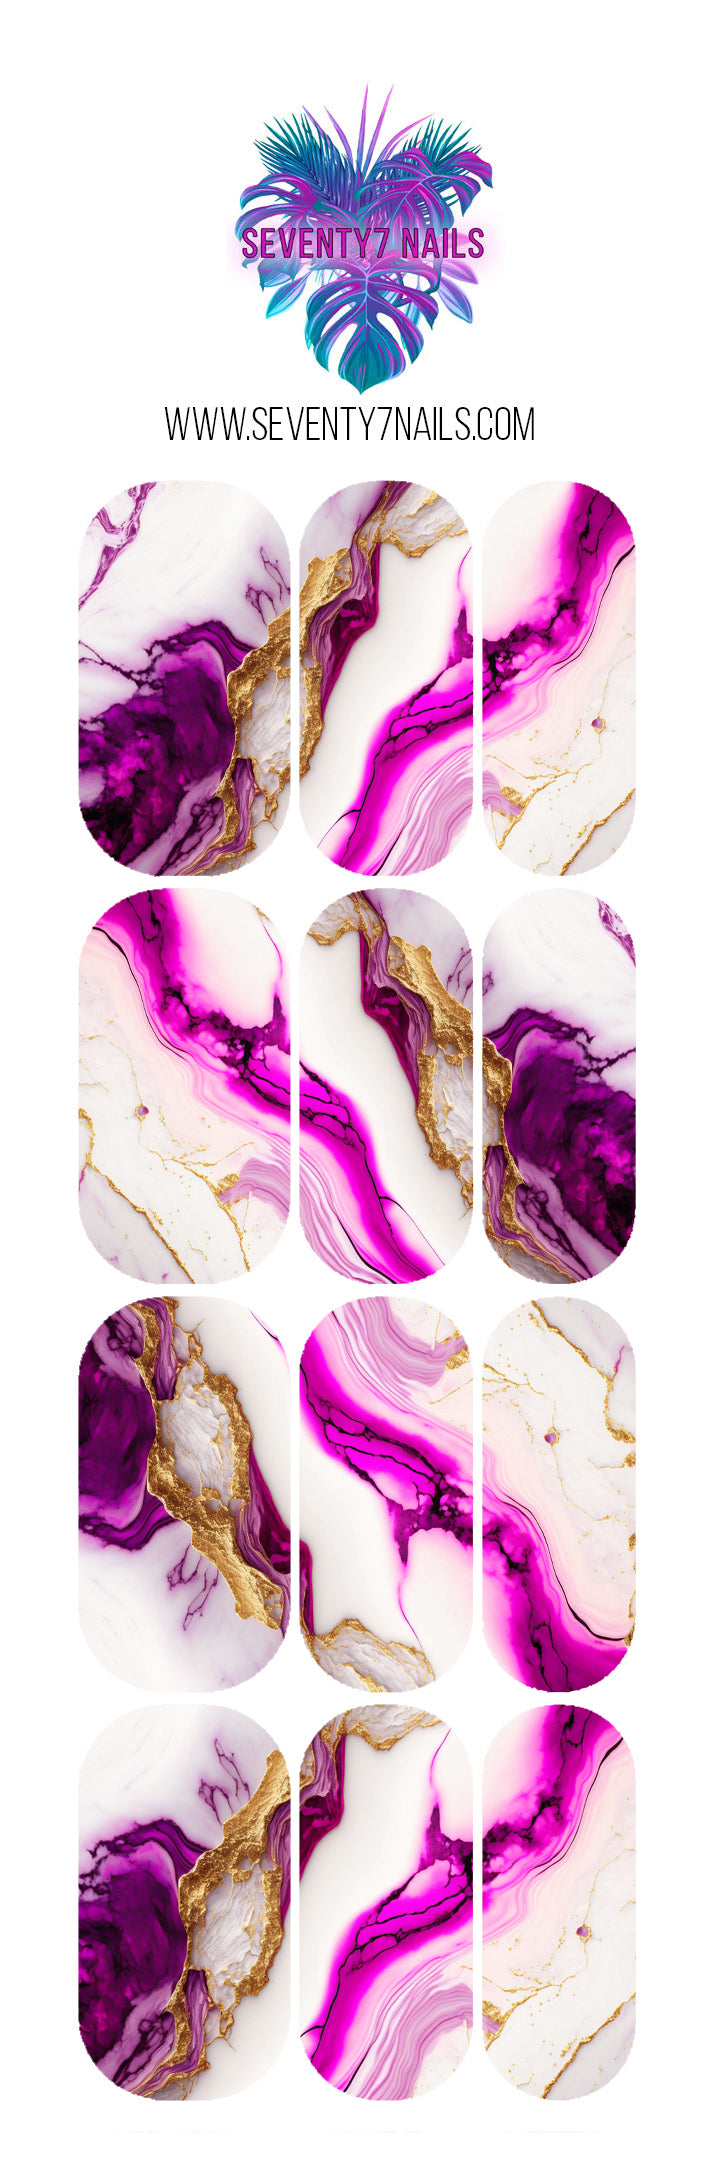 Waterslide Nail Decals - Hot Pink Marble